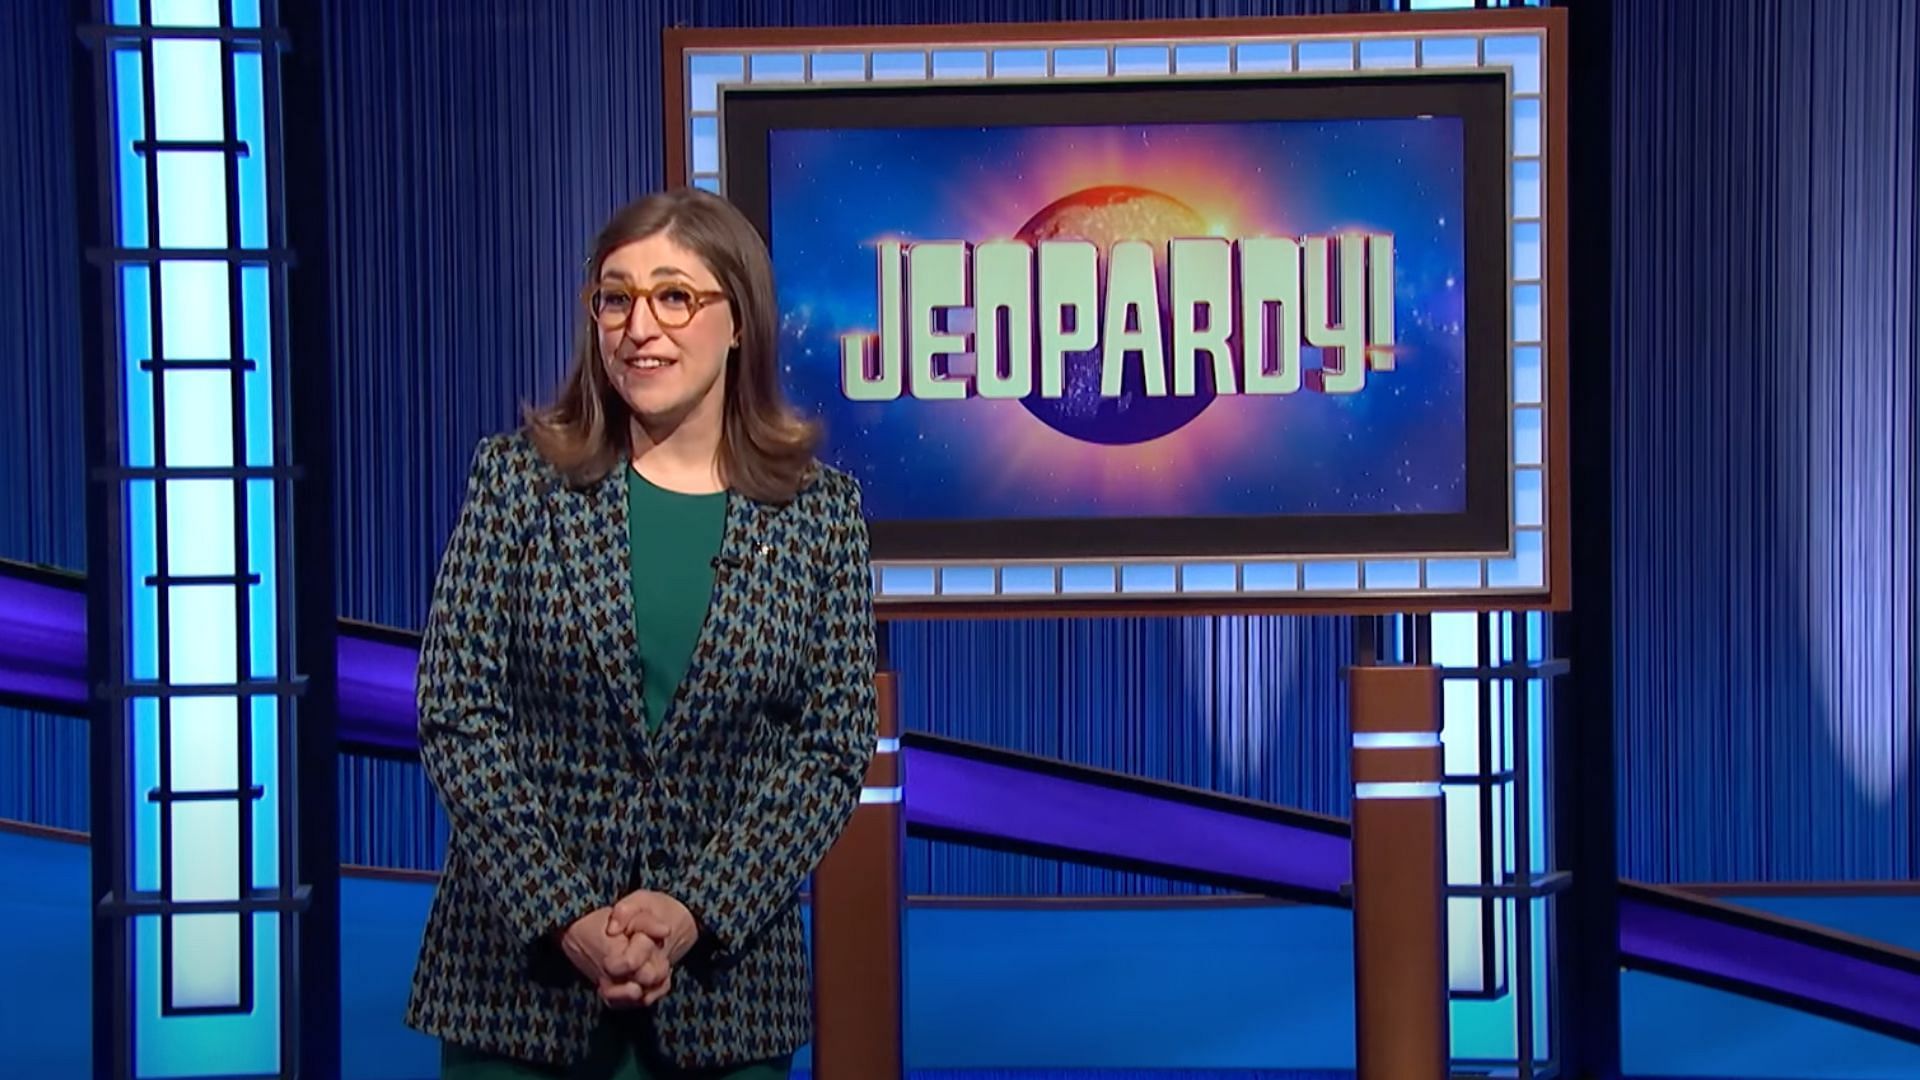 Mayim Bialik hosted the June 7, 2022 episode (Image via Jeopardy)